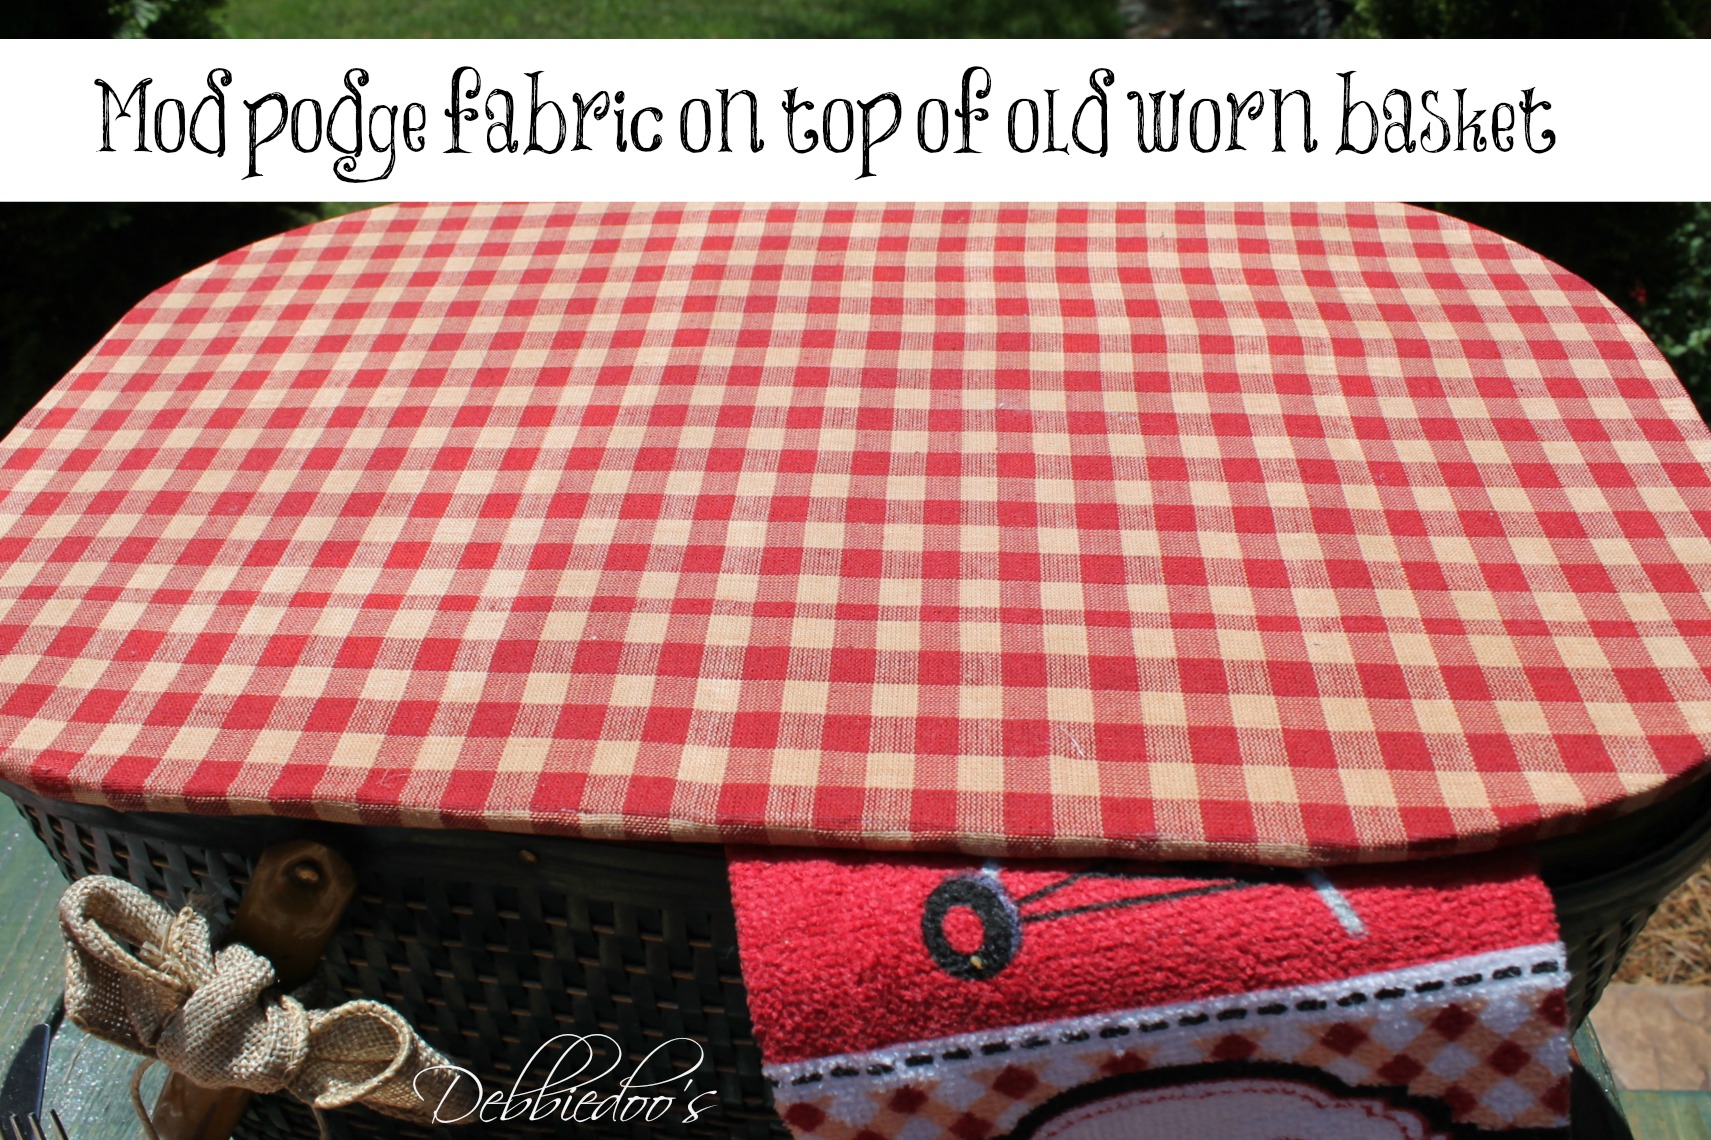 picnic on the patio with a repurposed vintage picnic basket mod podge on top of old worn picnic basket with fabric